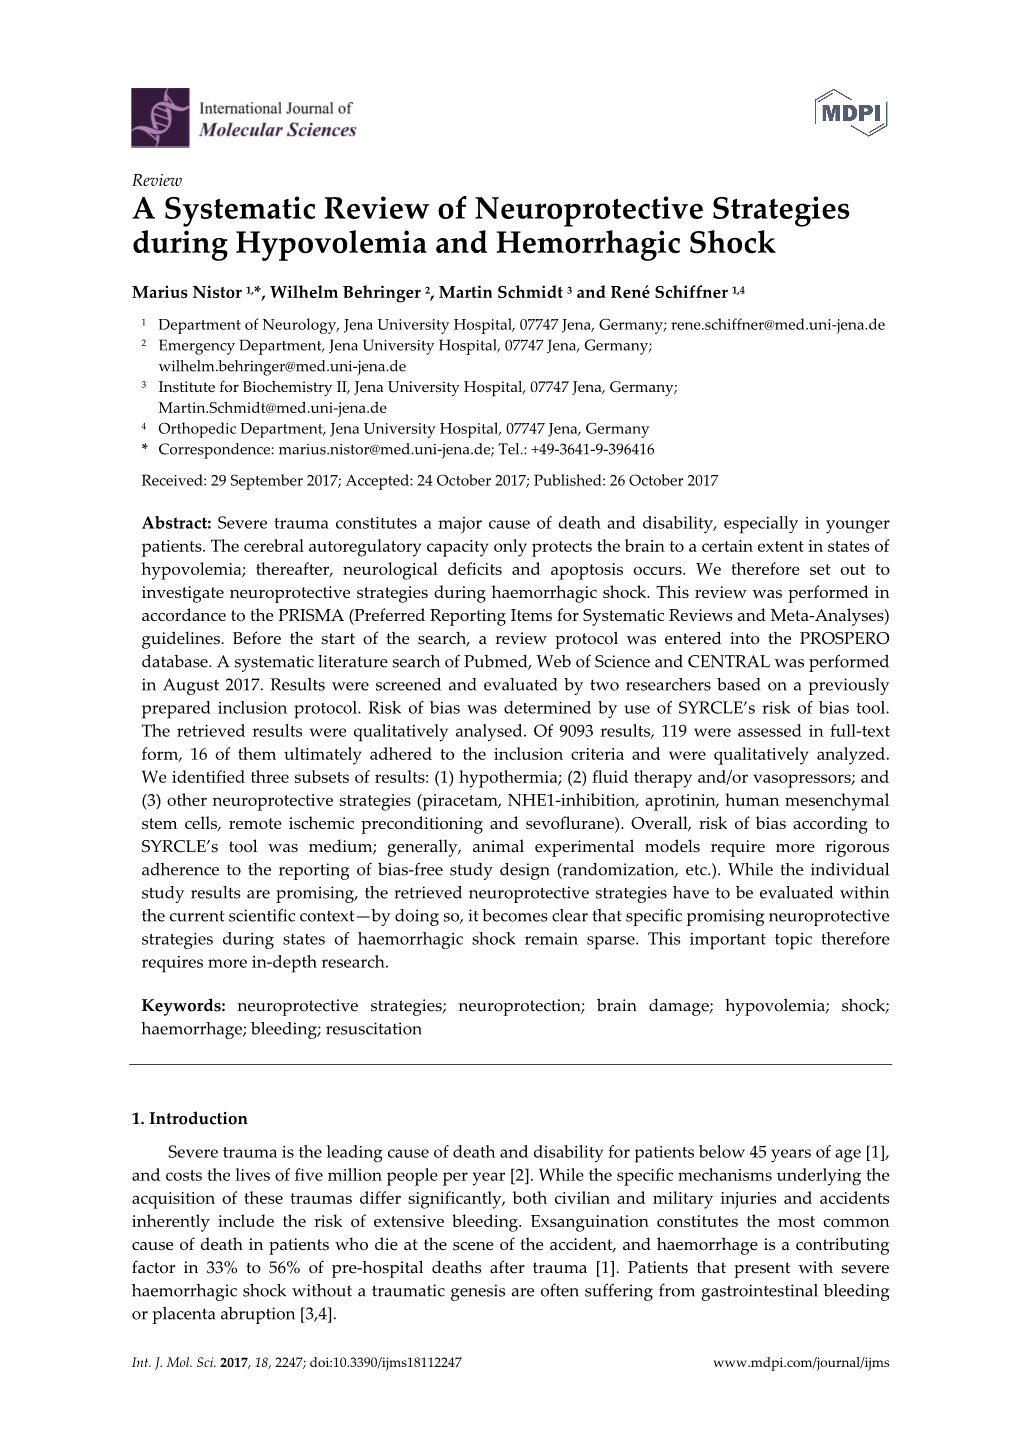 A Systematic Review of Neuroprotective Strategies During Hypovolemia and Hemorrhagic Shock